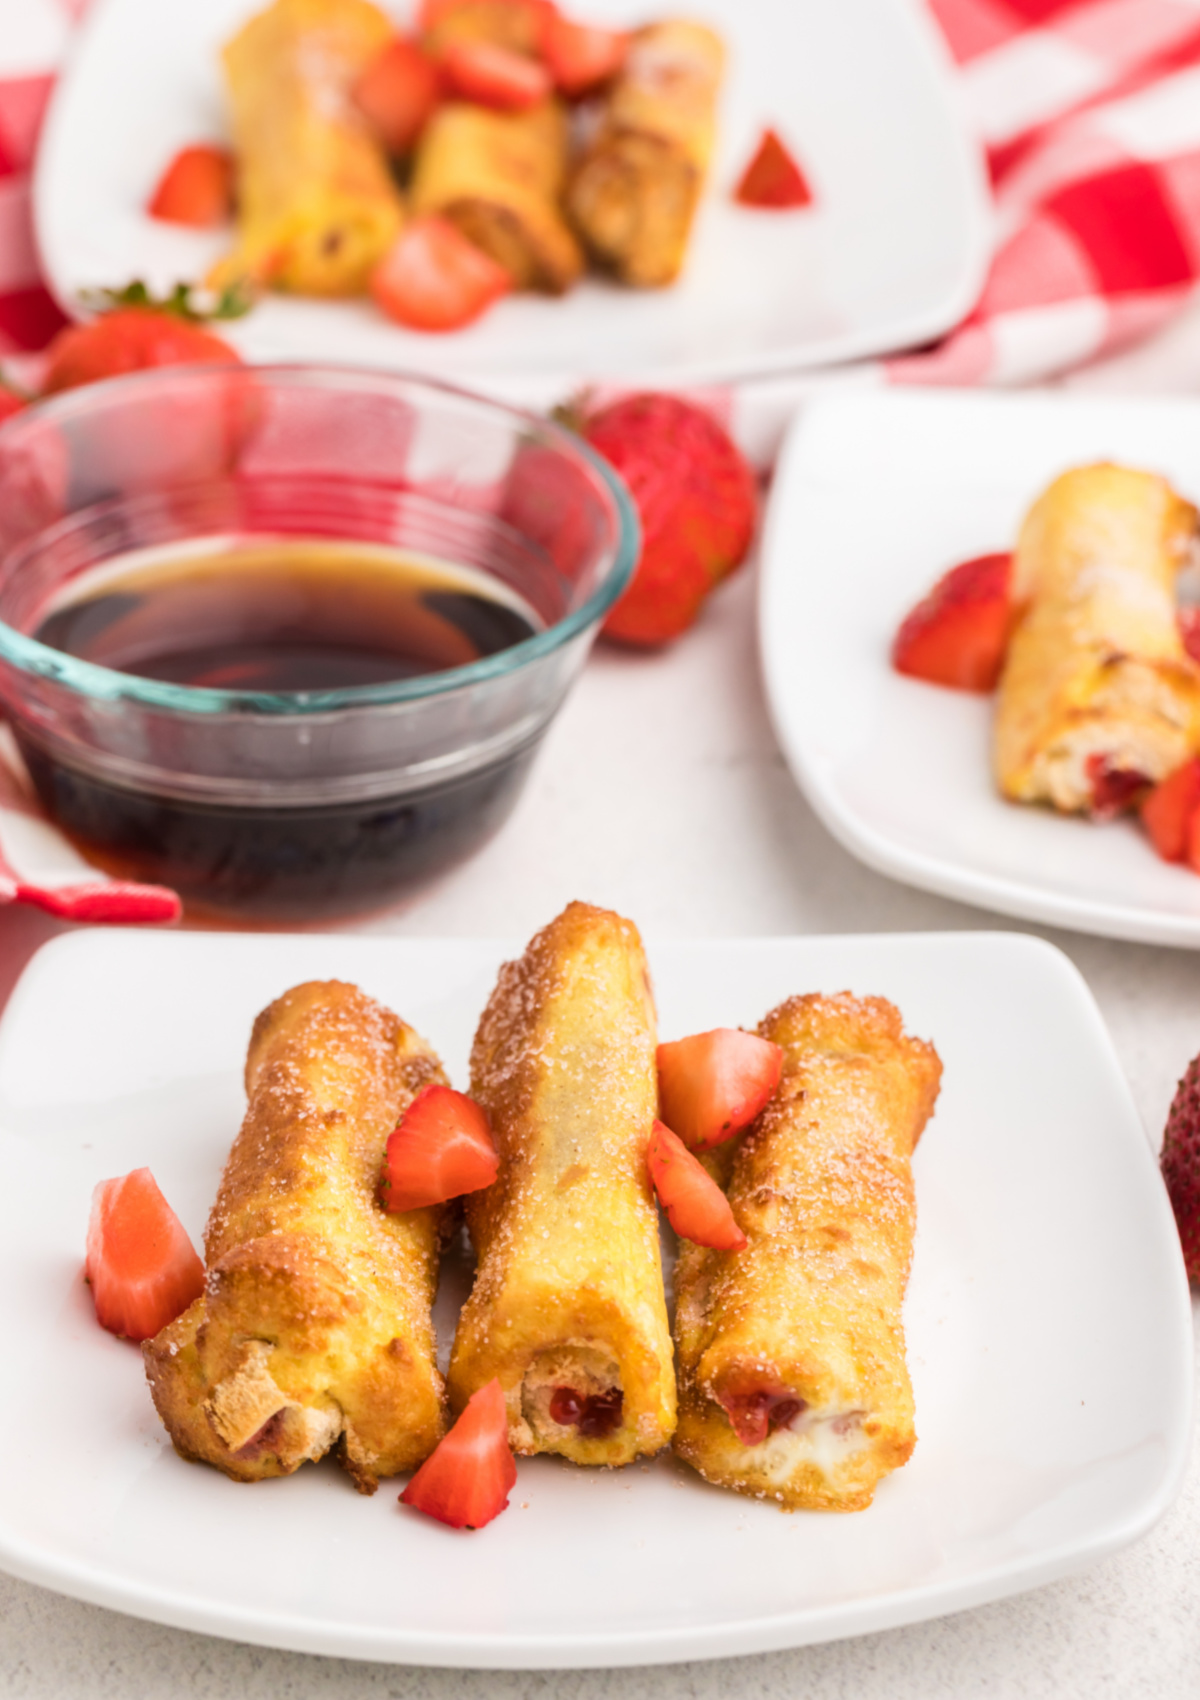 French toast roll-ups made in the air fryer and served on a plate.